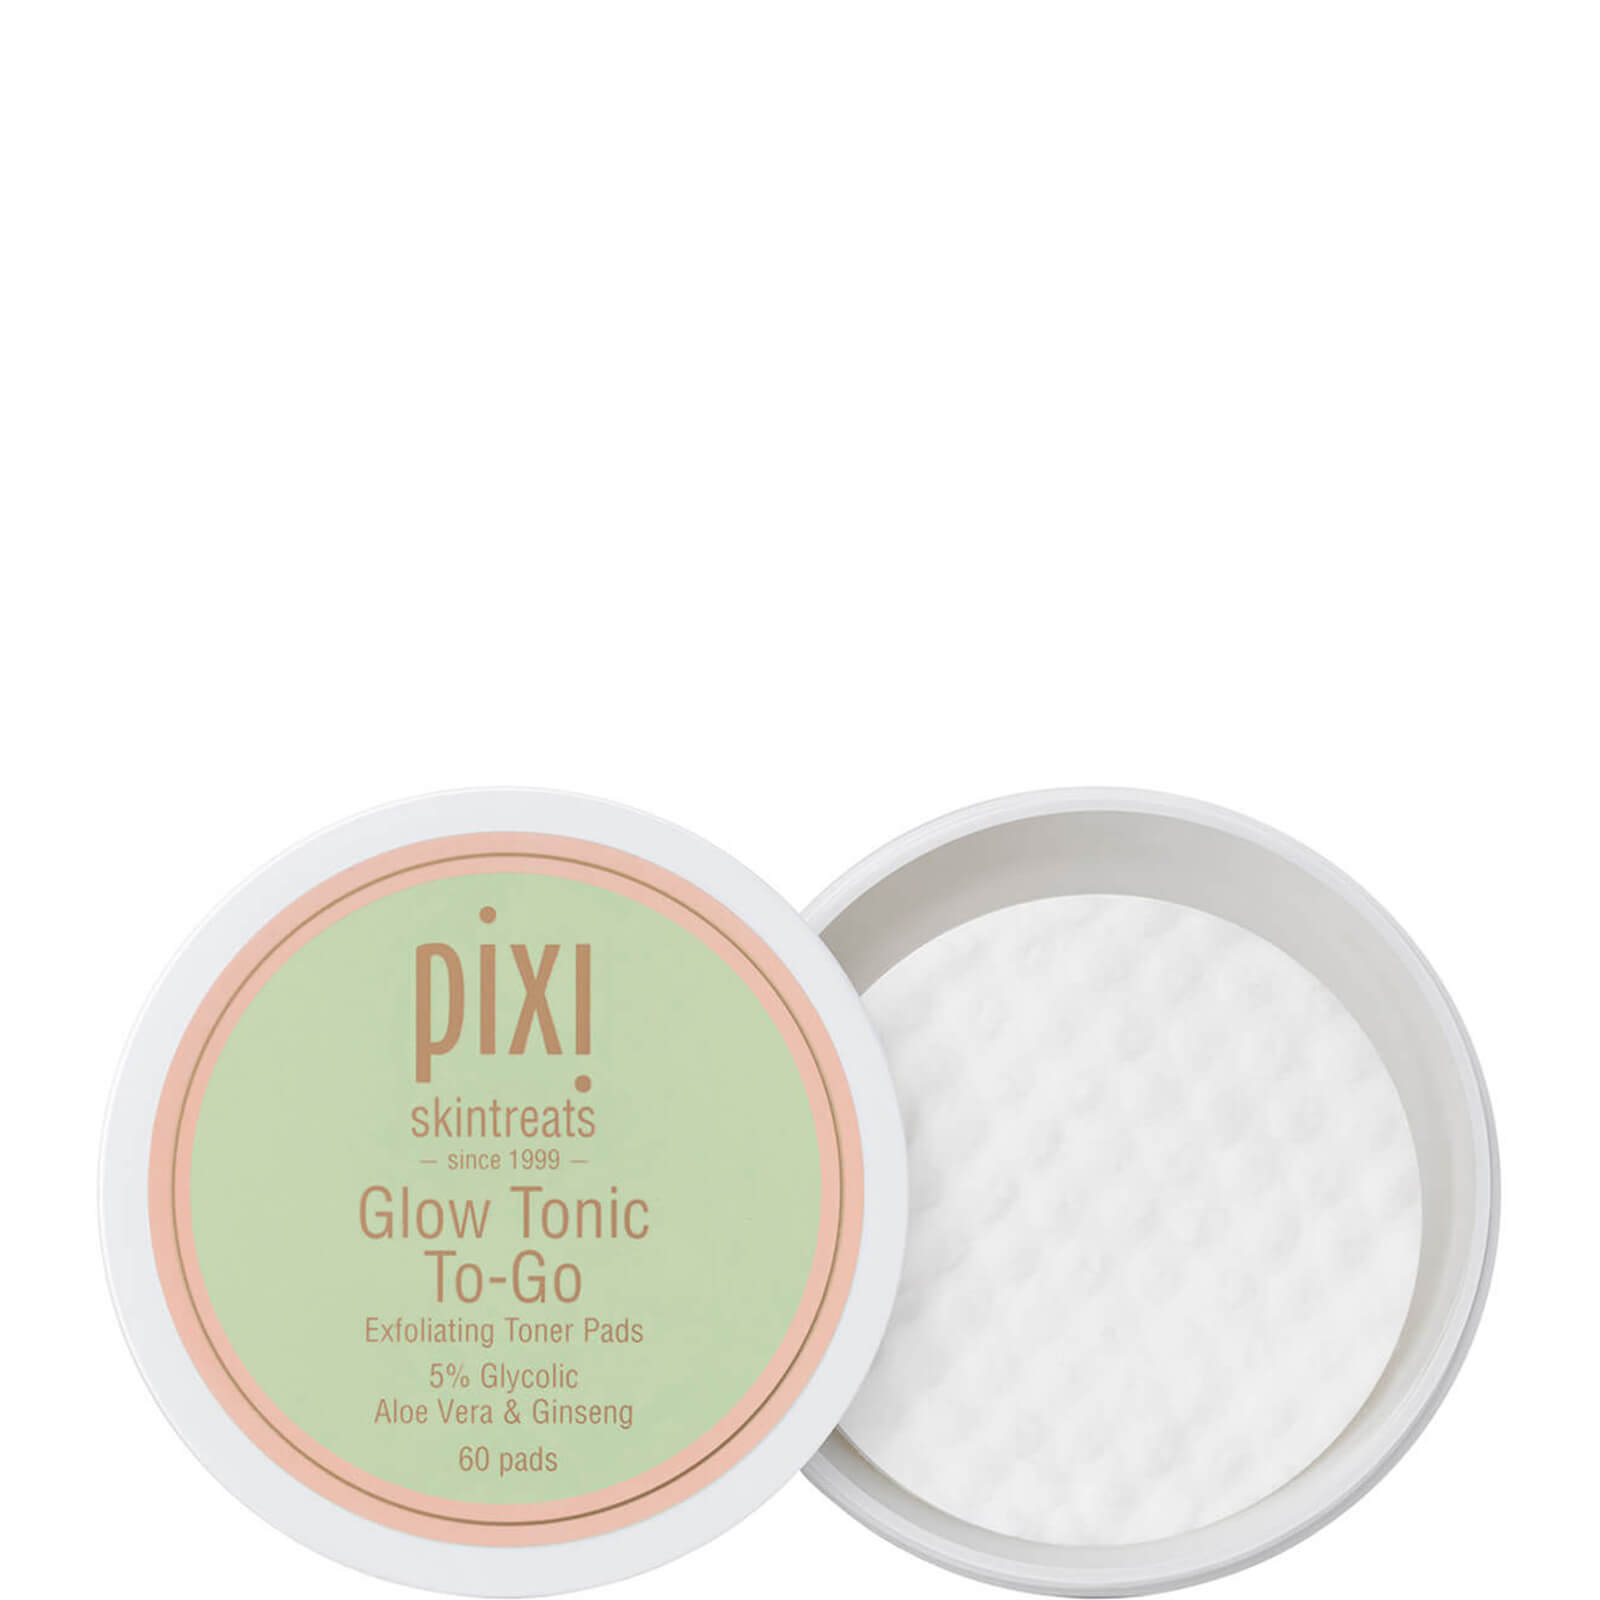 Photos - Facial / Body Cleansing Product PIXI Glow Tonic To-Go Pads (Pack of 60)